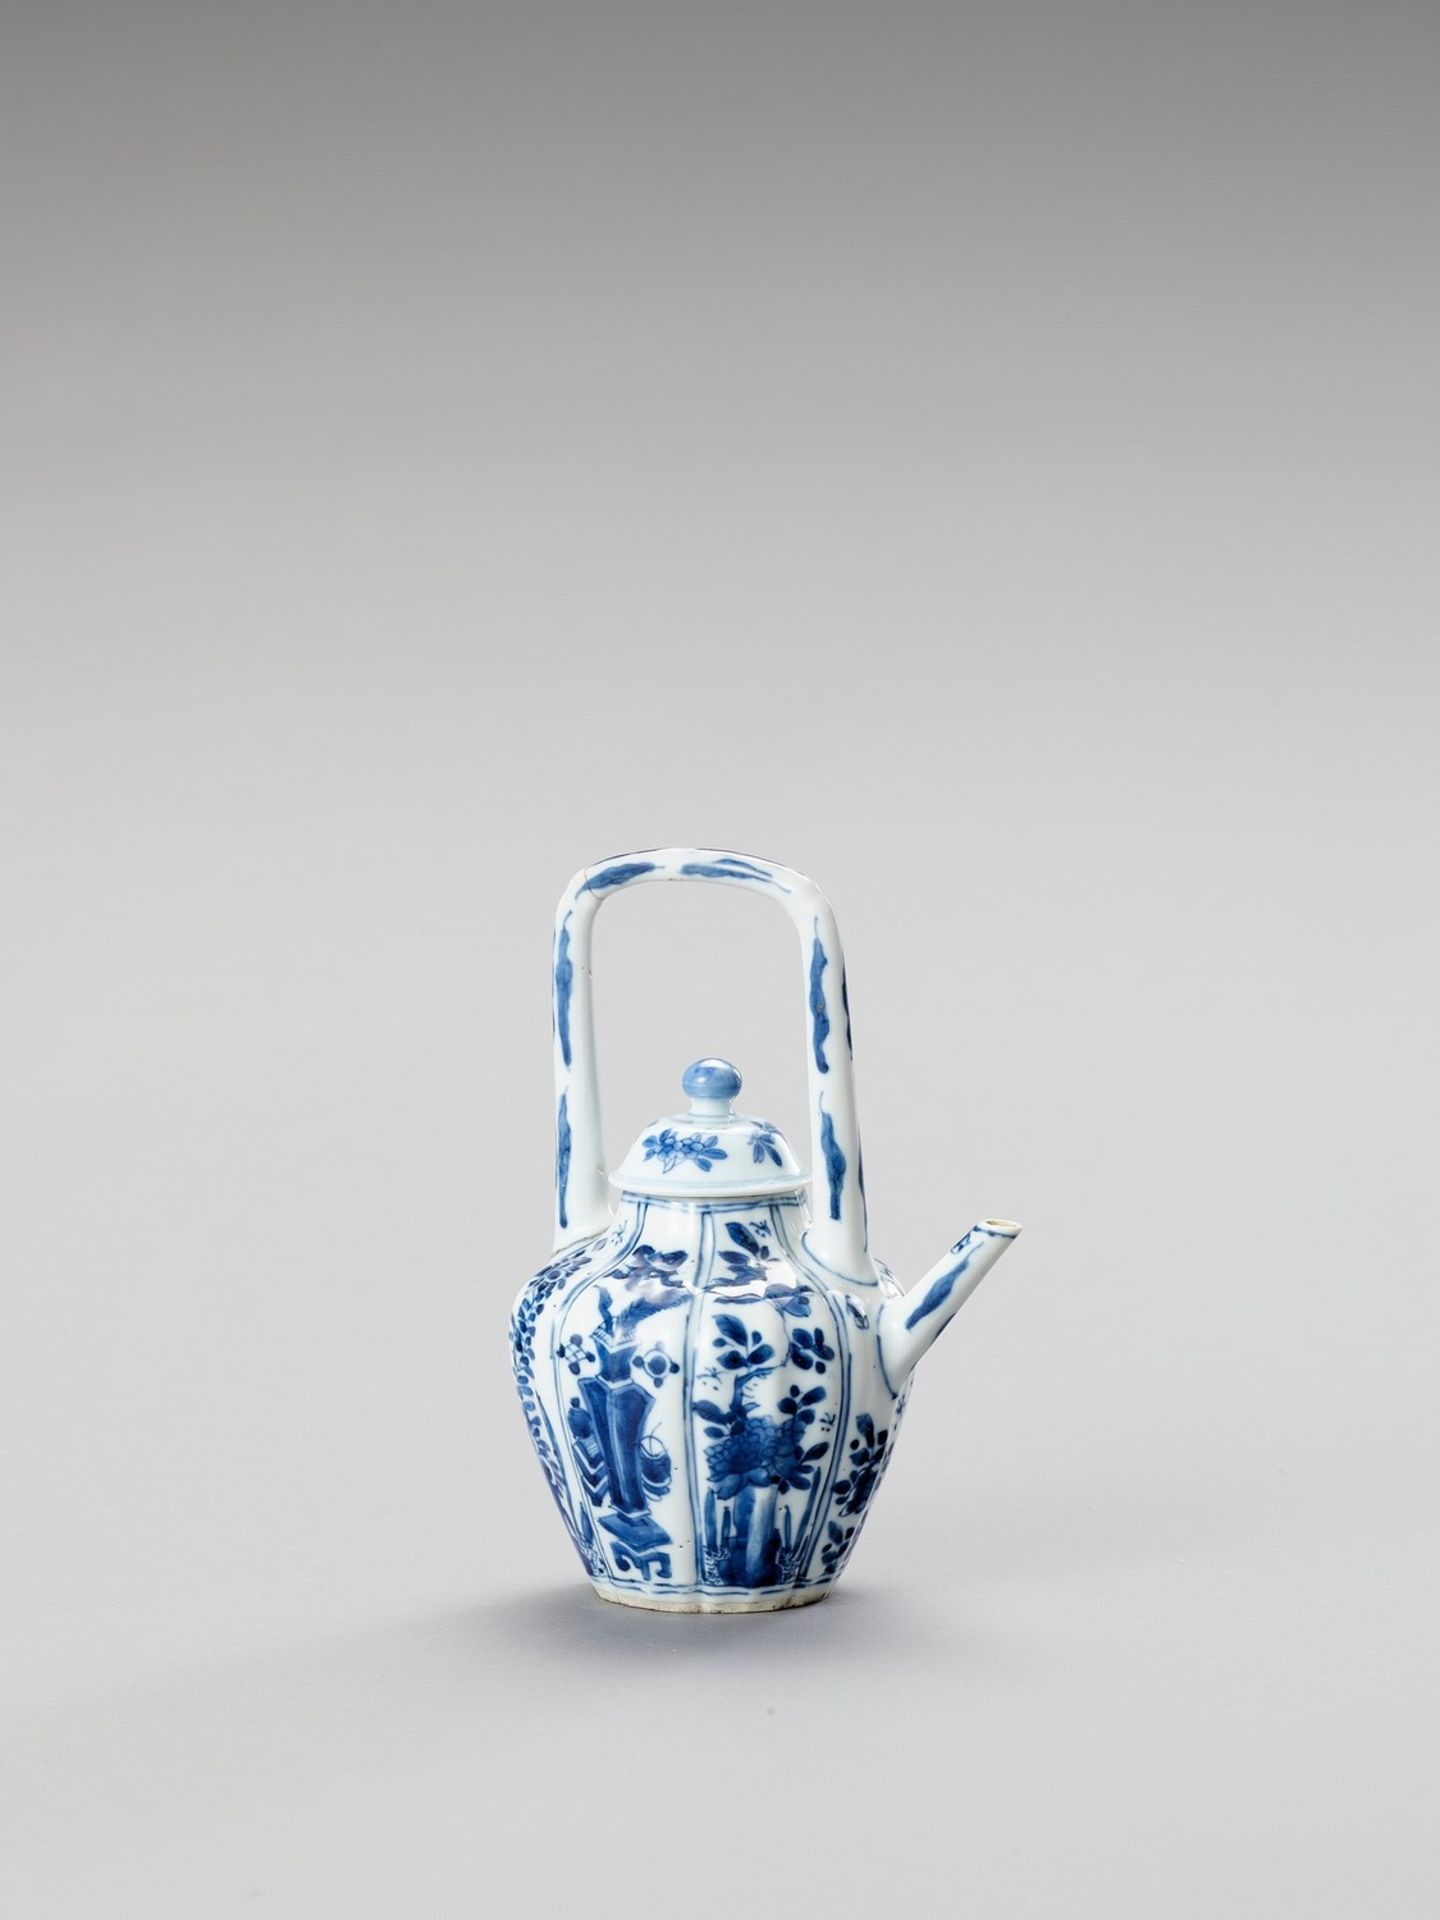 A BLUE AND WHITE PORCELAIN TEAPOT - Image 3 of 6